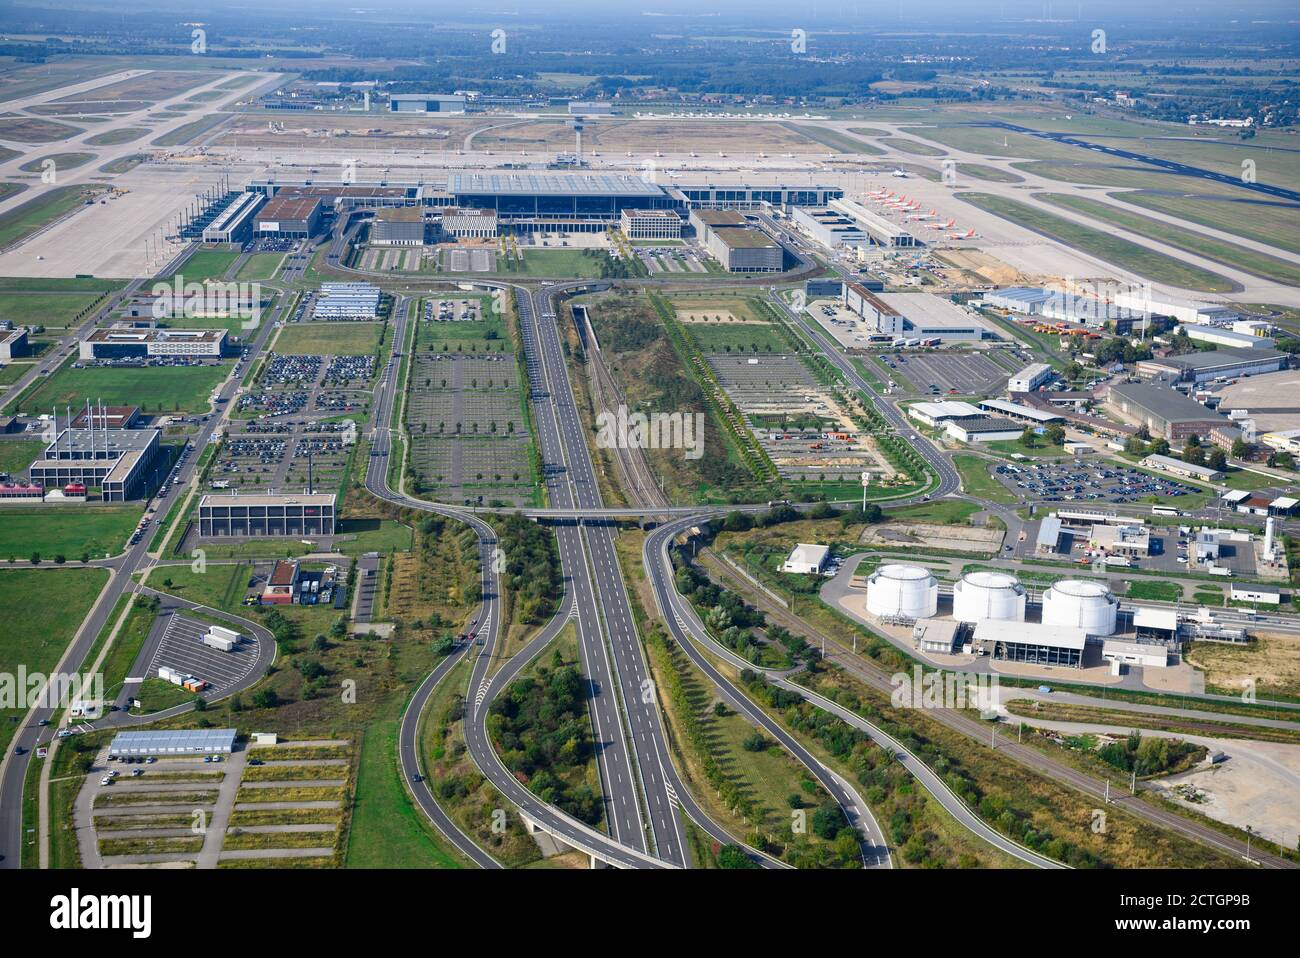 15 September 2020, Brandenburg, Schönefeld: Aerial view of the future airport Berlin Brandenburg 'Willy Brandt'. After a short transitional period, the capital city airport is to replace the current airports Tegel and Schönefeld. Photo: Soeren Stache/dpa-Zentralbild/ZB Stock Photo